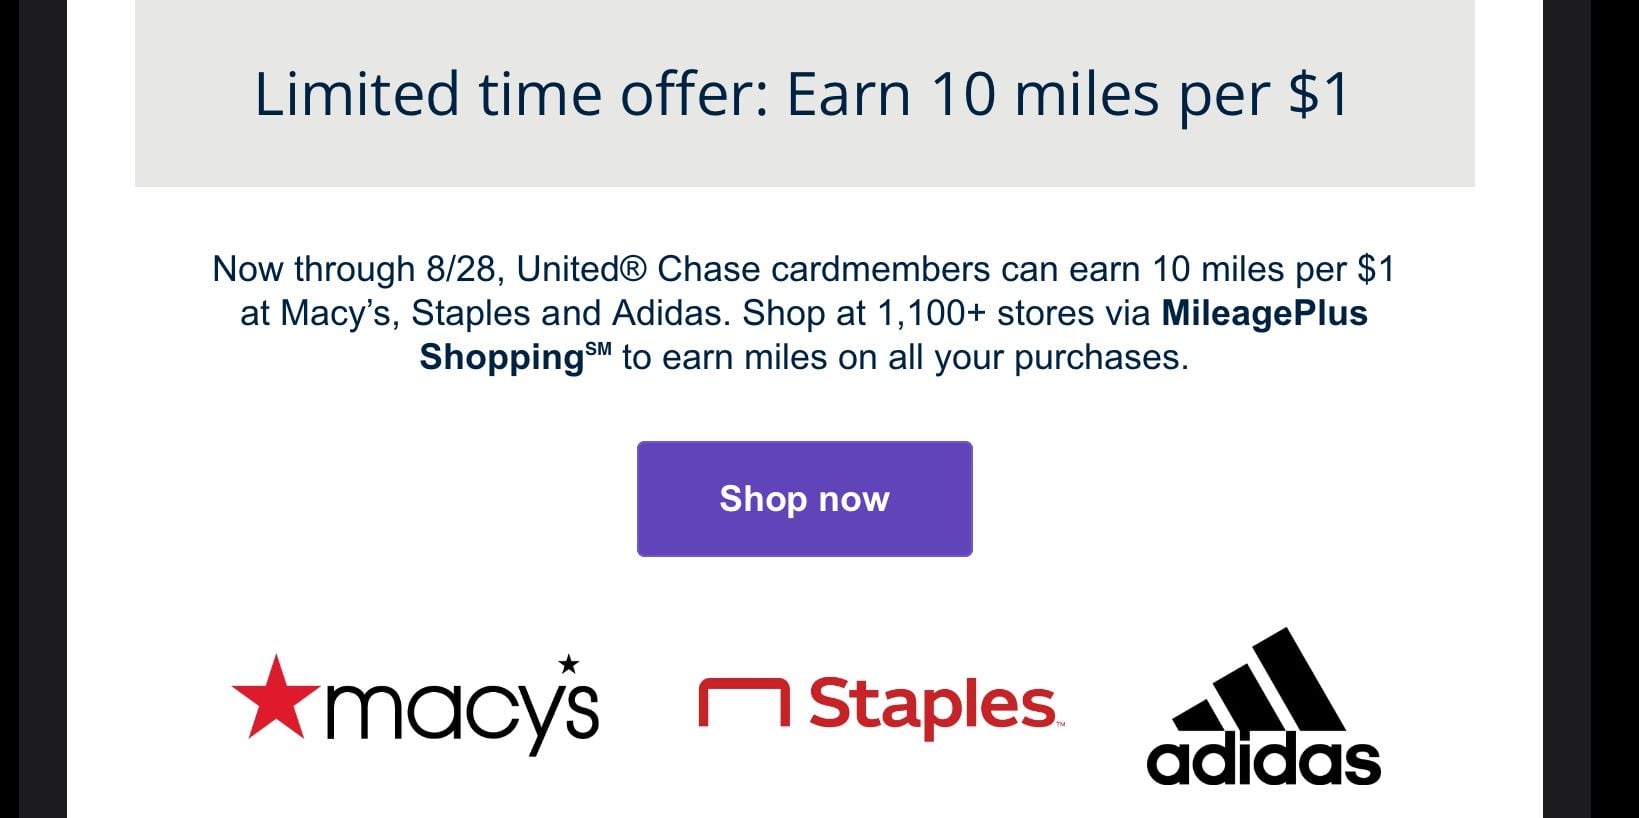 chase-offers-merchant-branded-discounts-or-rebates-on-specific-cards